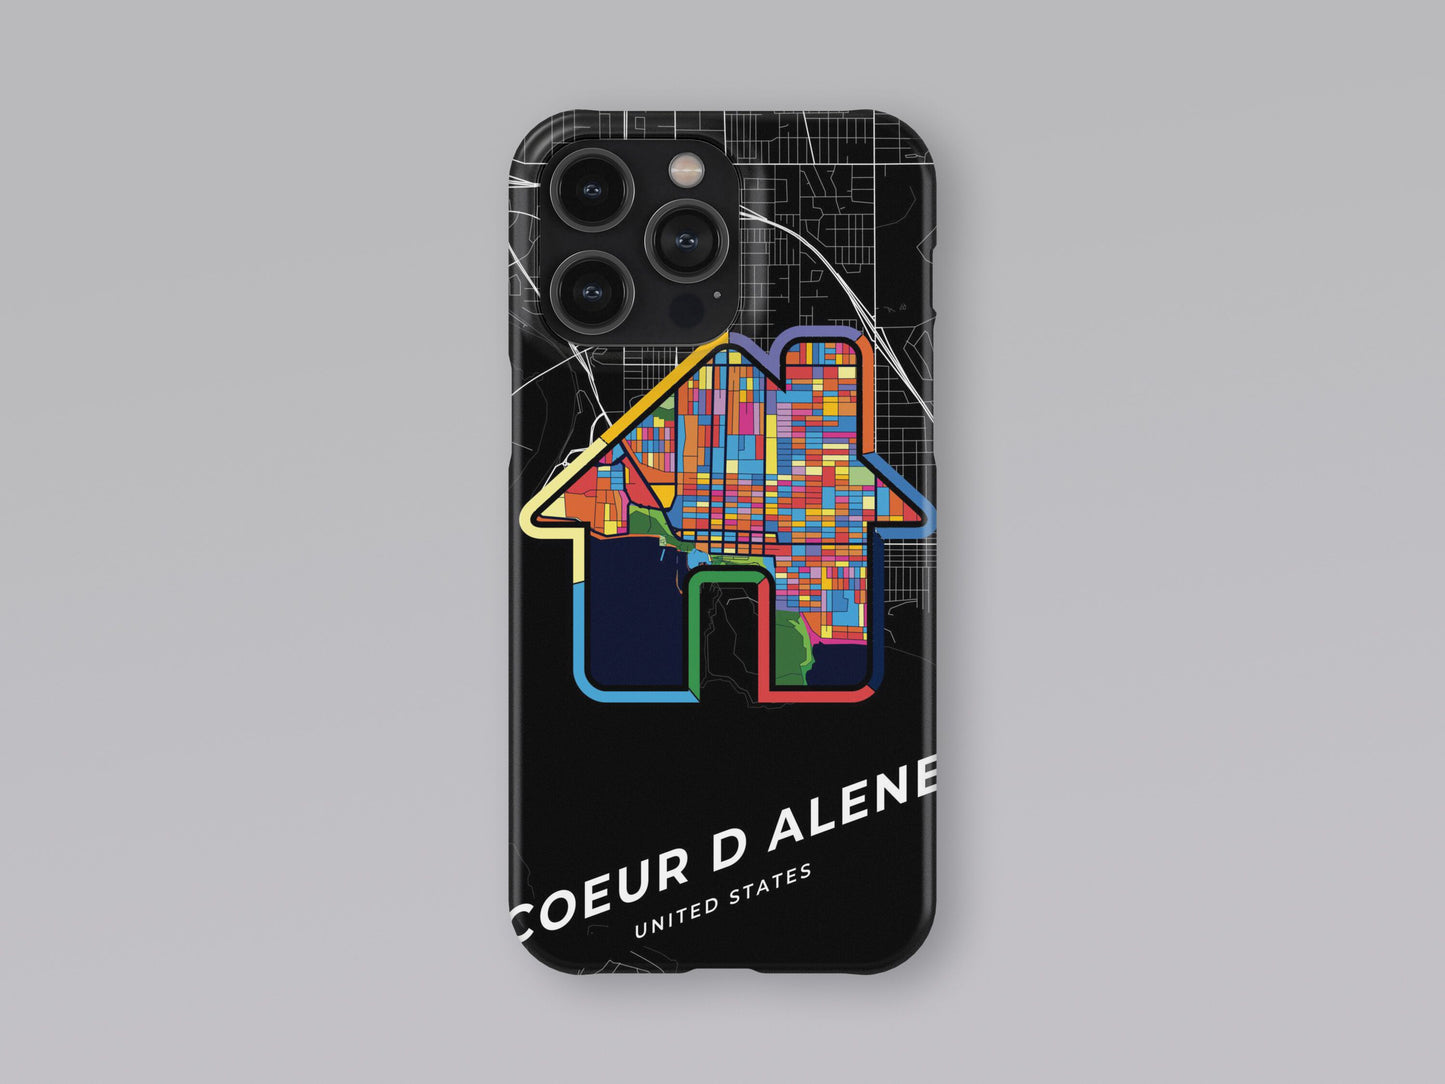 Coeur D Alene Idaho slim phone case with colorful icon. Birthday, wedding or housewarming gift. Couple match cases. 3